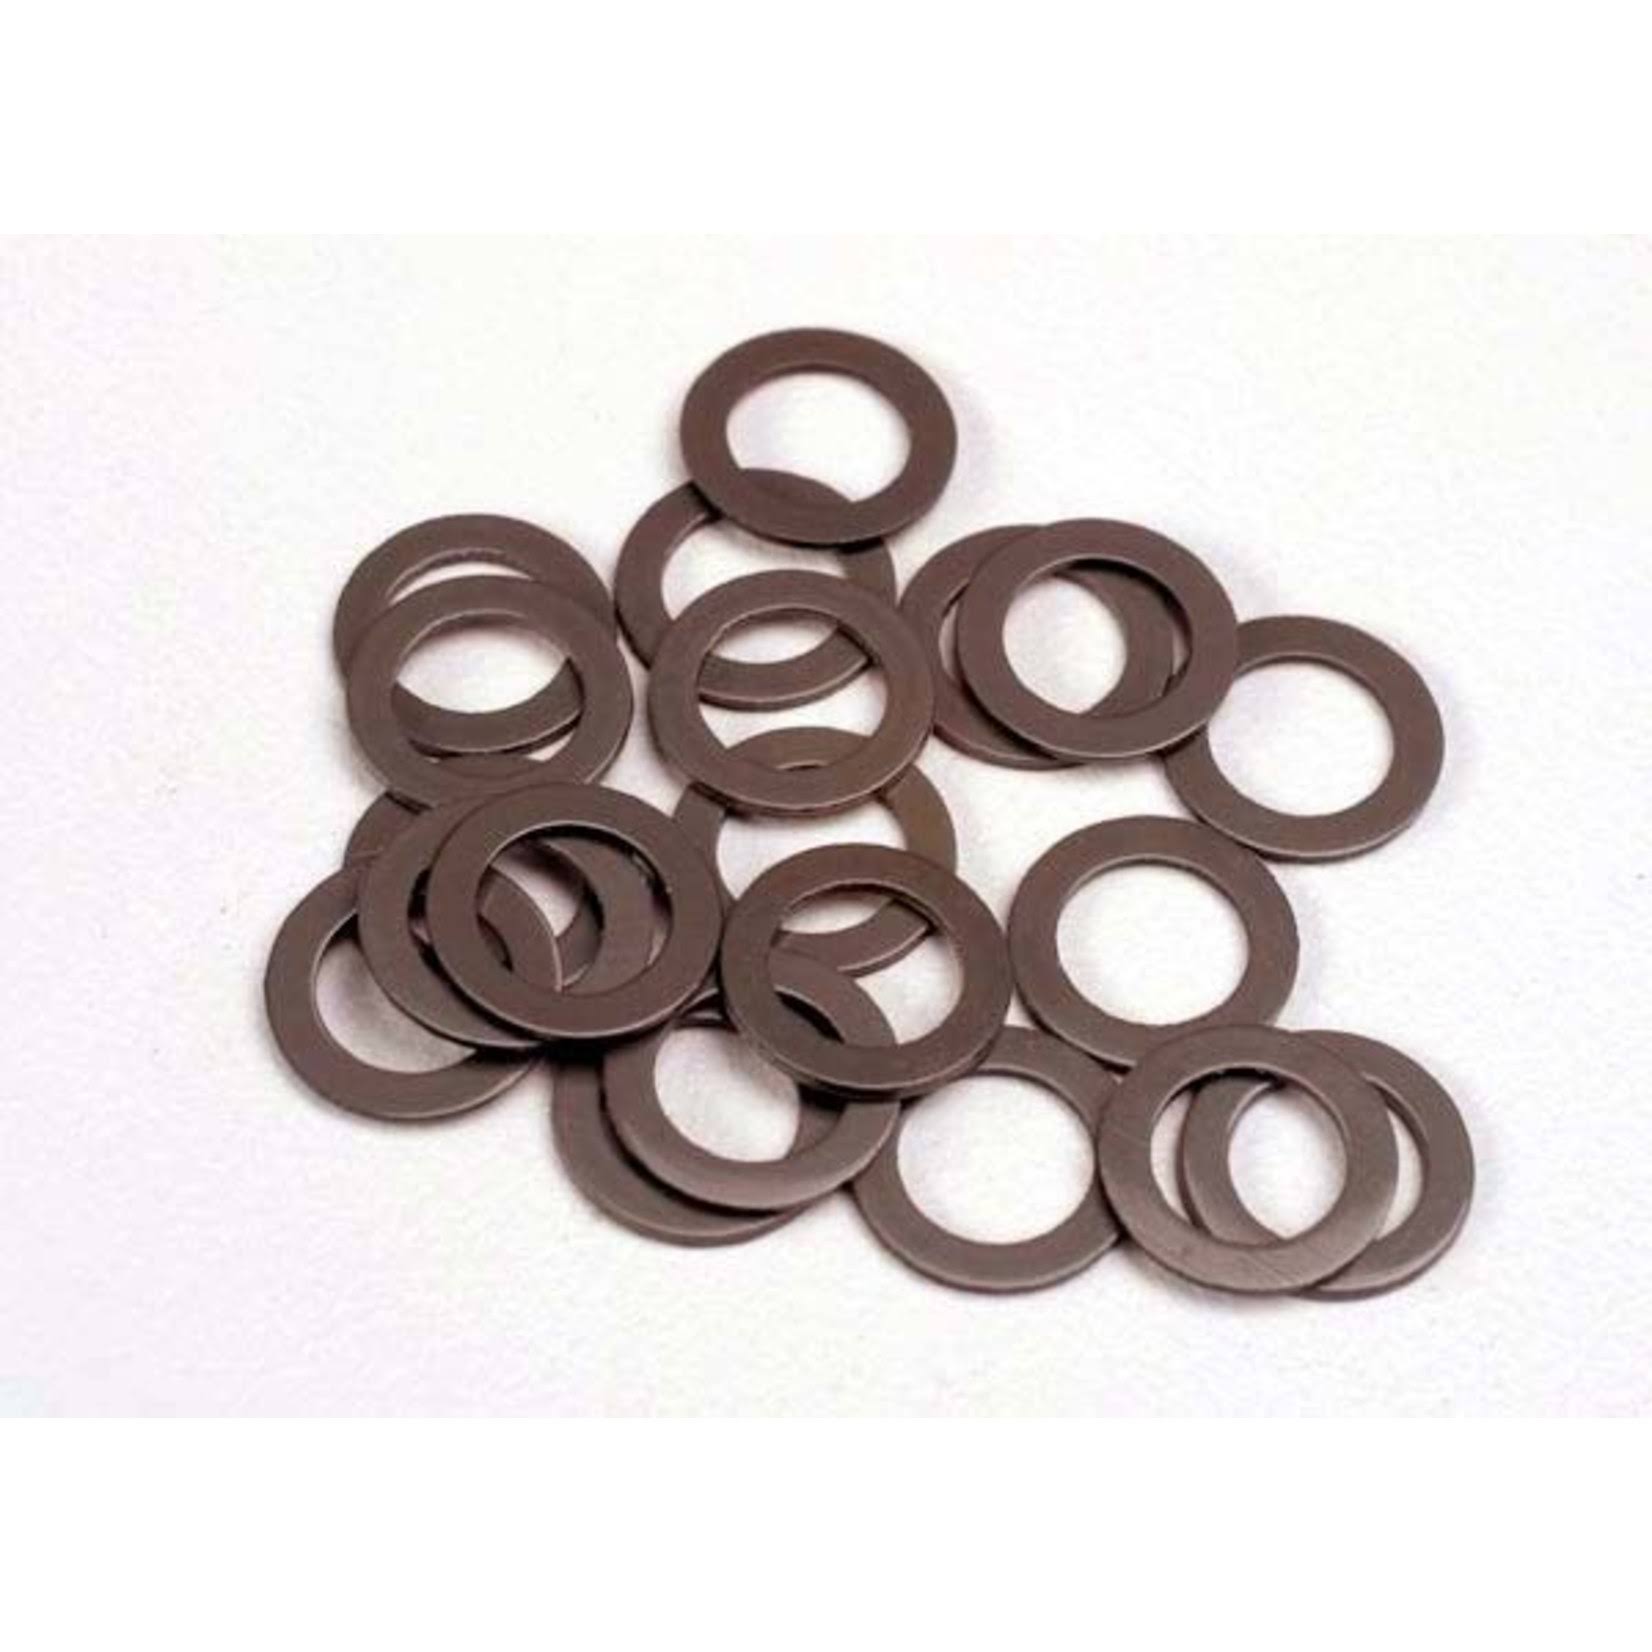 Traxxas 1985 PTFE Coated Washers - 5 x 8 x 0.5mm, Set of 20